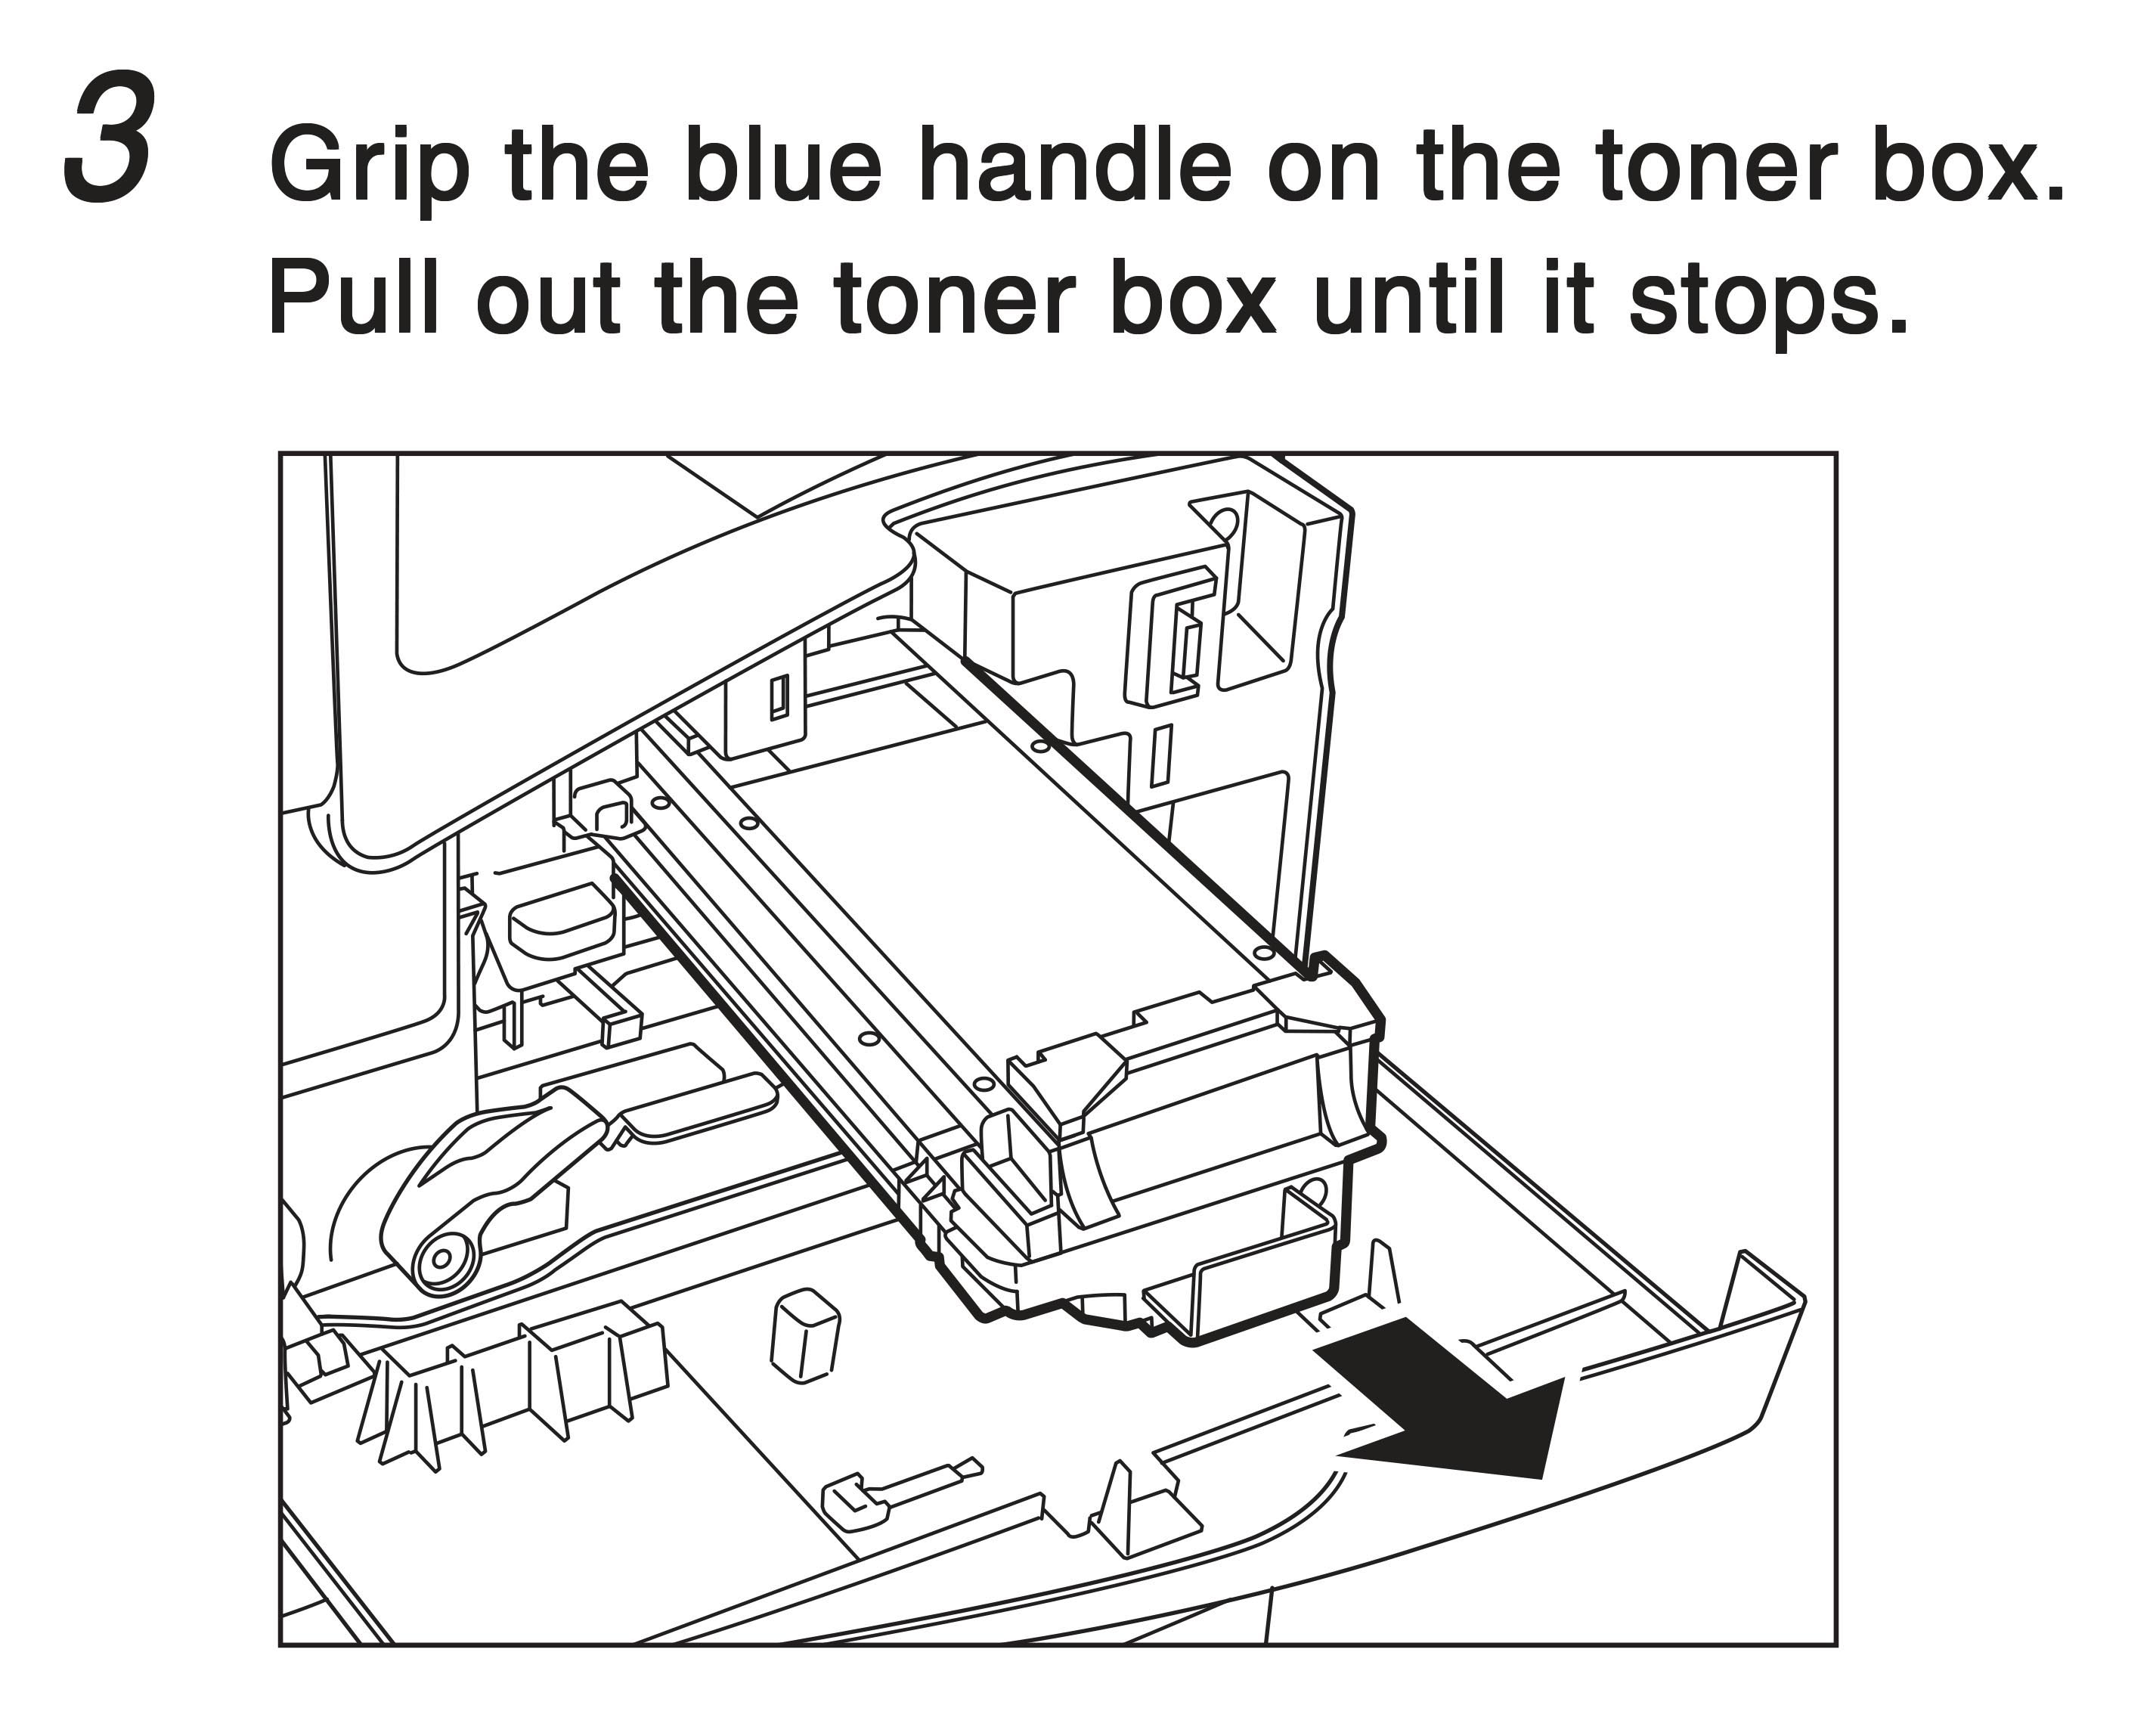 3. Grip the blue handle on the toner box. Pull out the toner box until it stops.